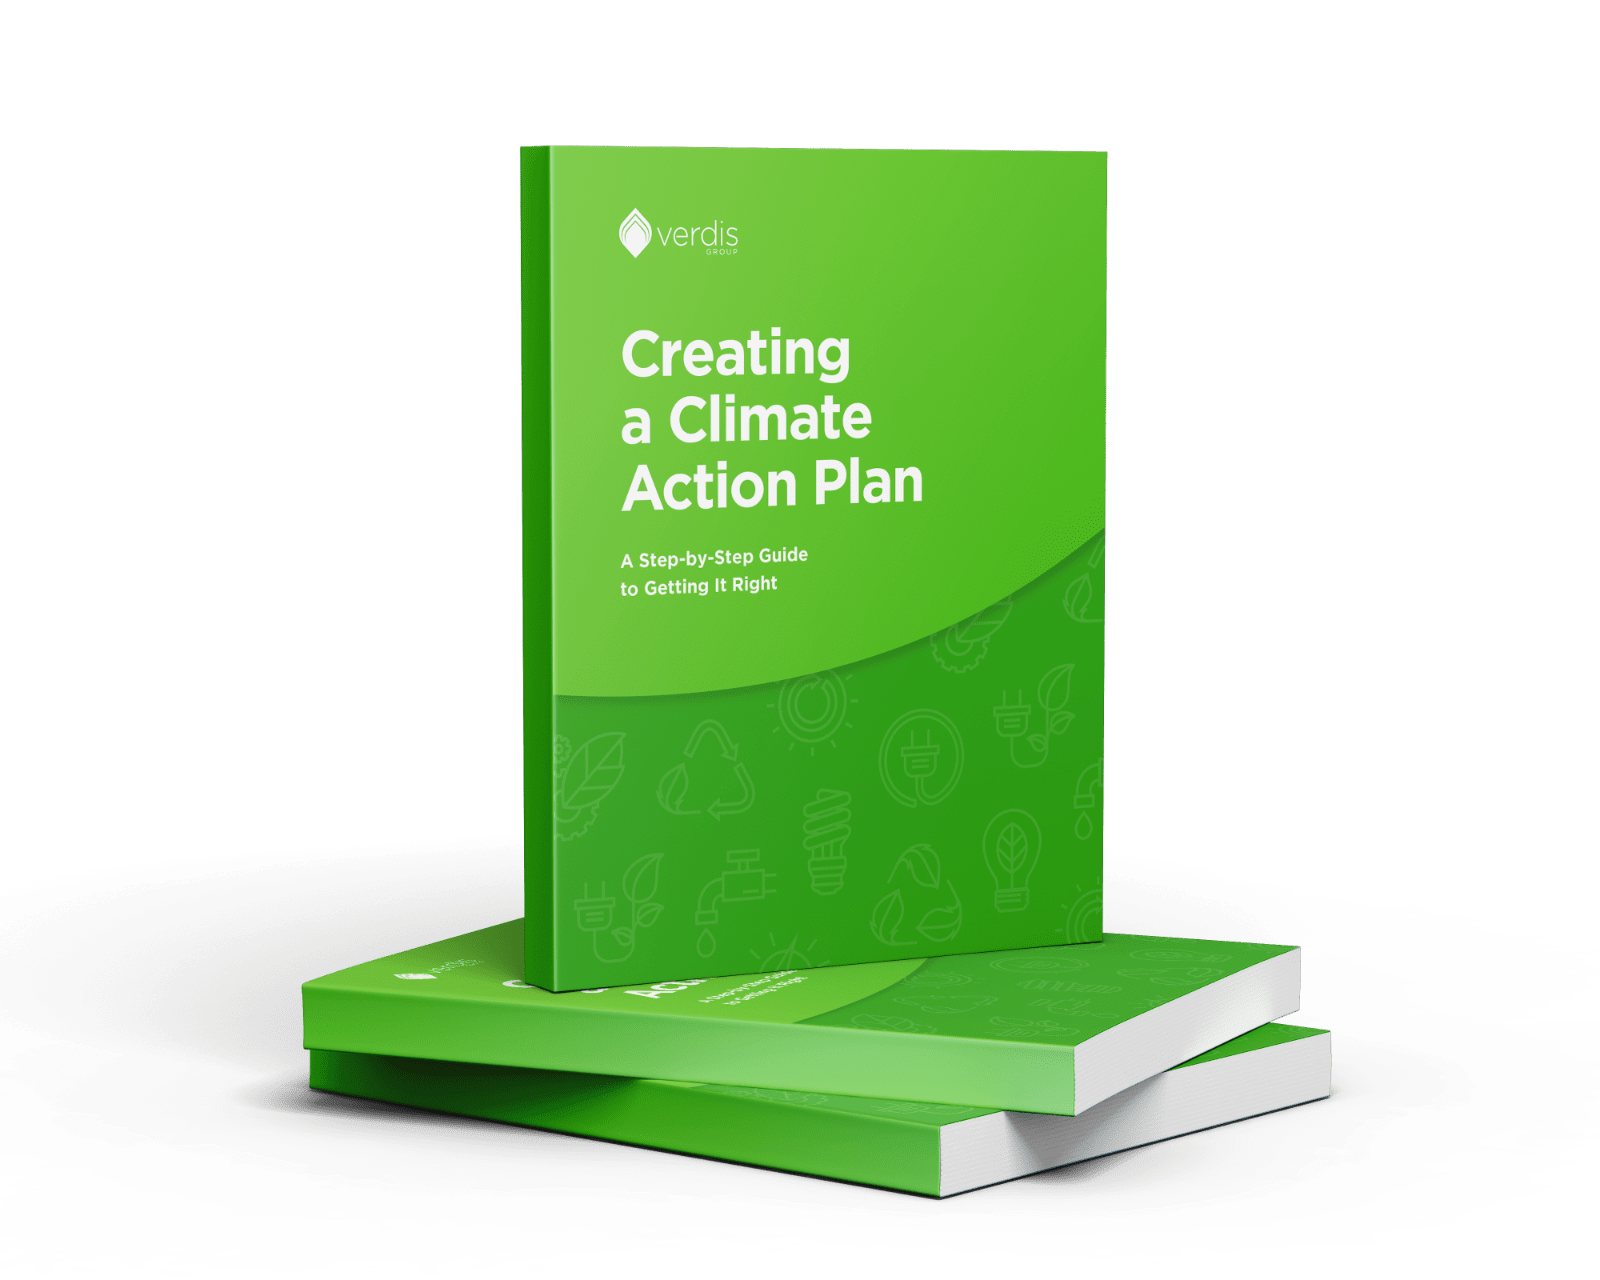 Image of a free guide for Creating a Climate Action Plan